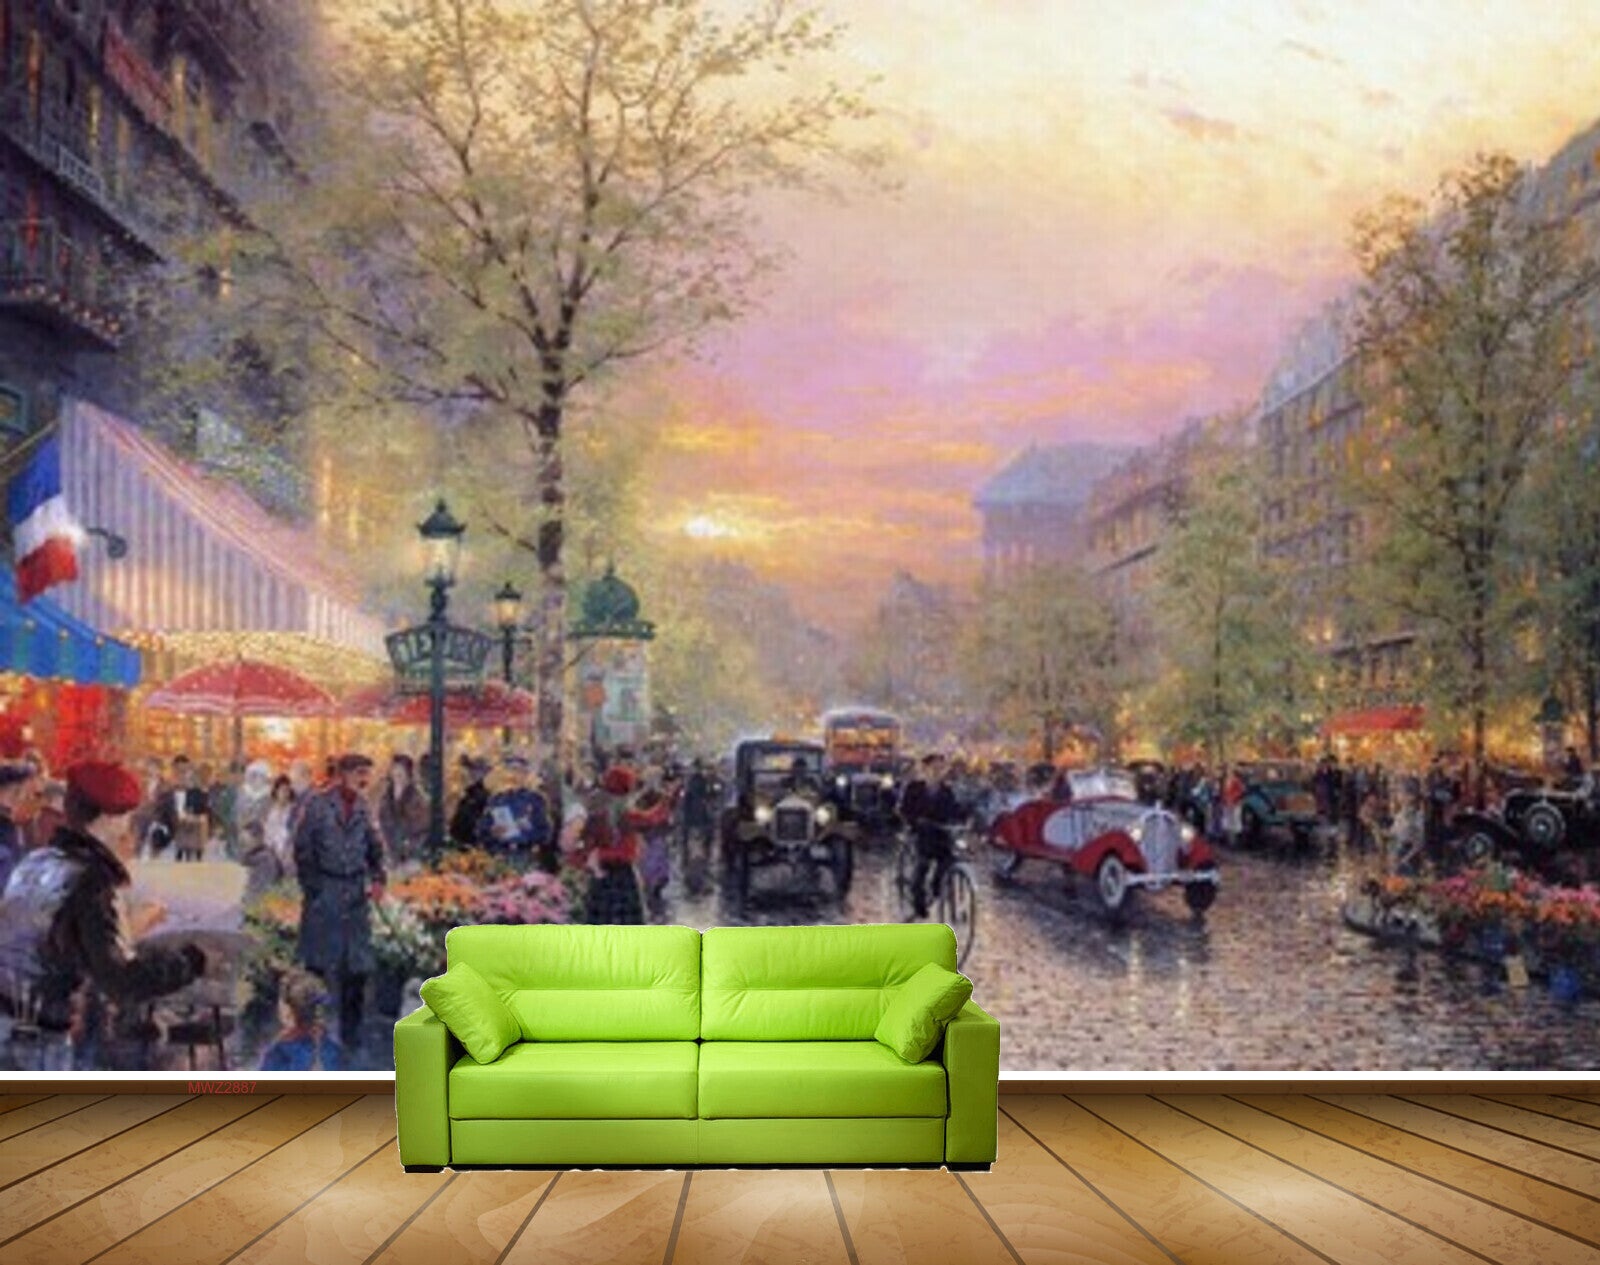 Avikalp MWZ2887 Clouds Trees Road Cars People Lamps Market Place City Travel Painting HD Wallpaper